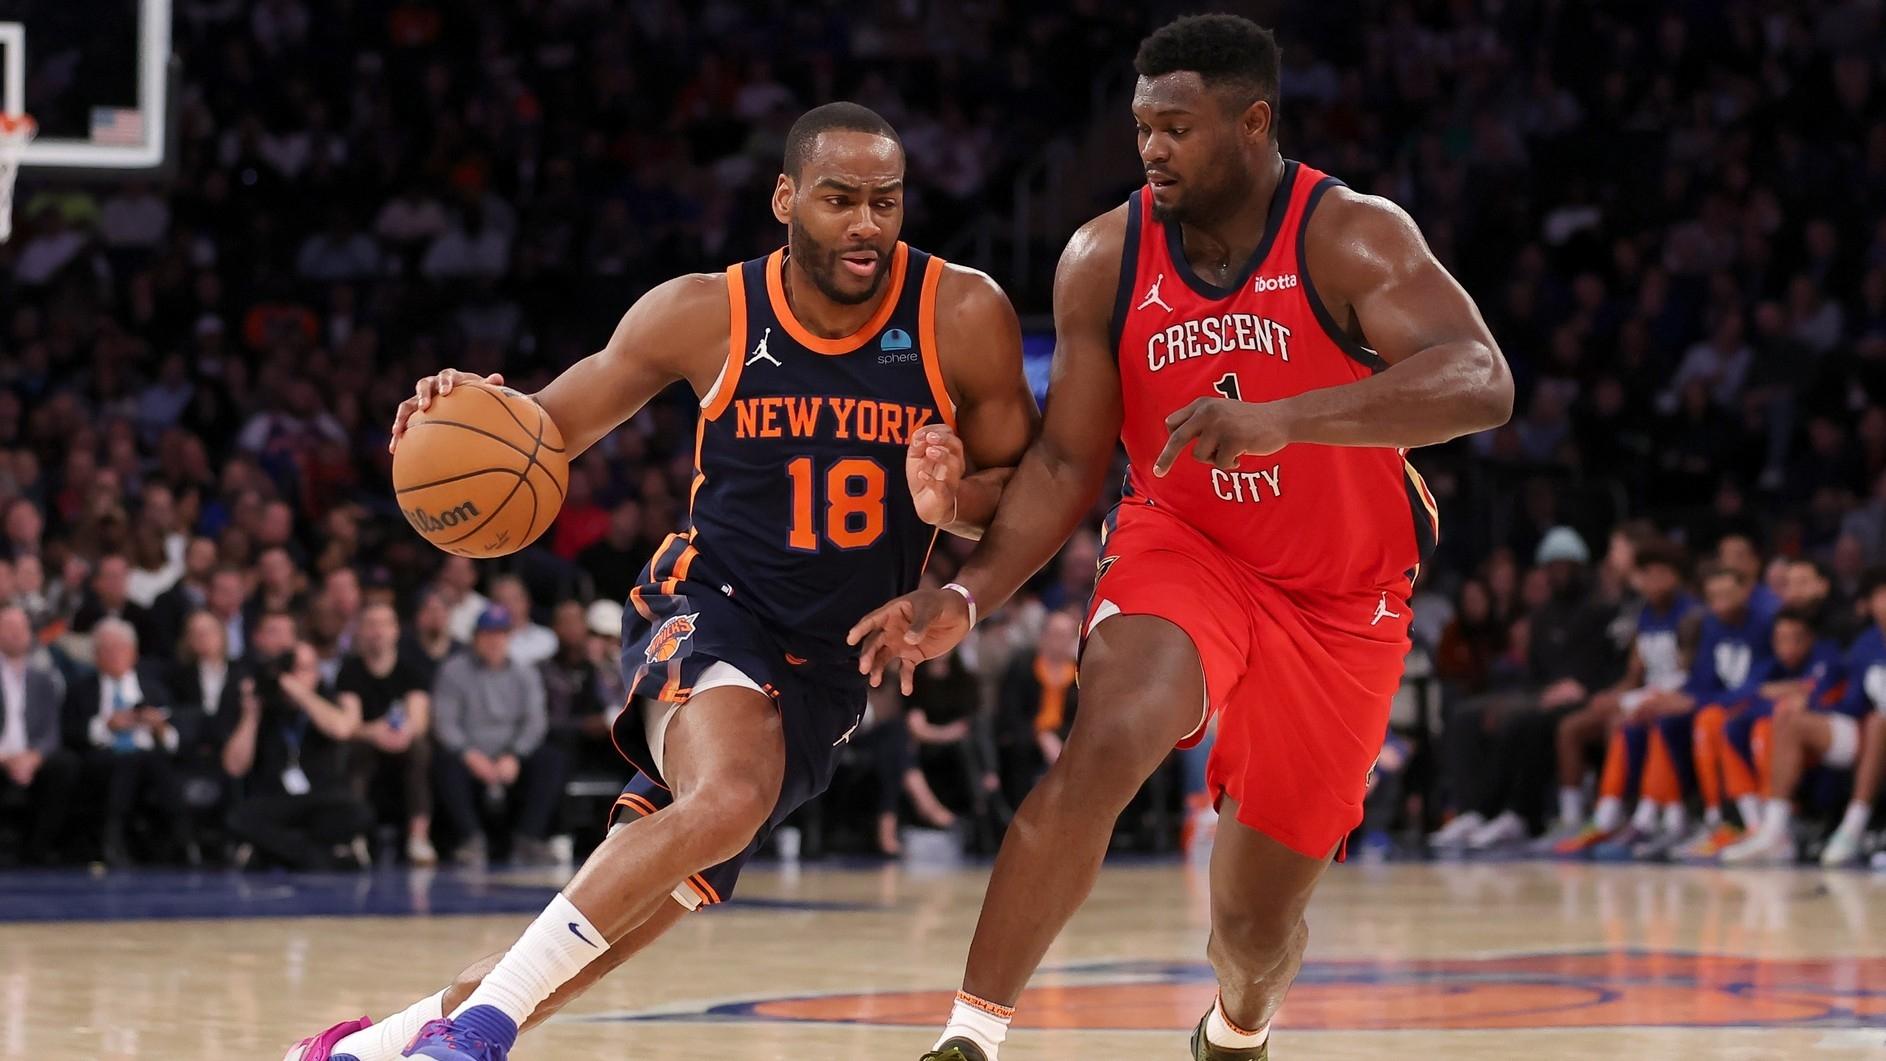 New York Knicks guard Alec Burks (18) drives to the basket against New Orleans Pelicans forward Zion Williamson (1) during the second quarter at Madison Square Garden.